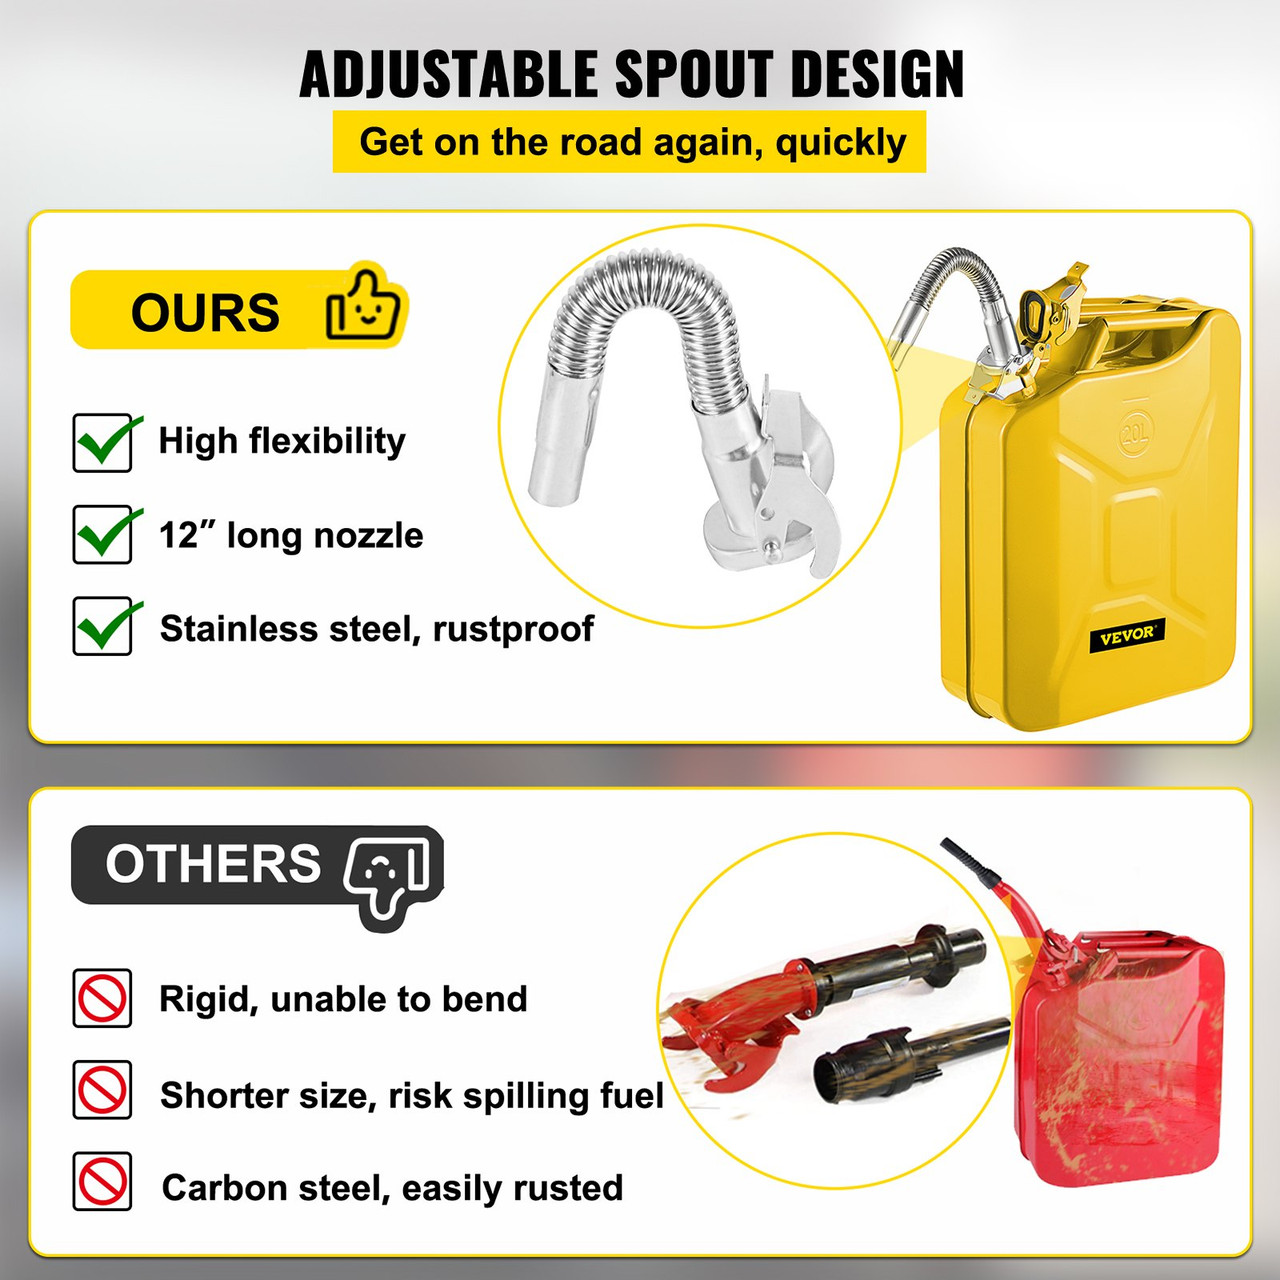 Jerry Can 5.3 Gal / 20L Jerry Fuel Can with Flexible Spout for Cars Yellow